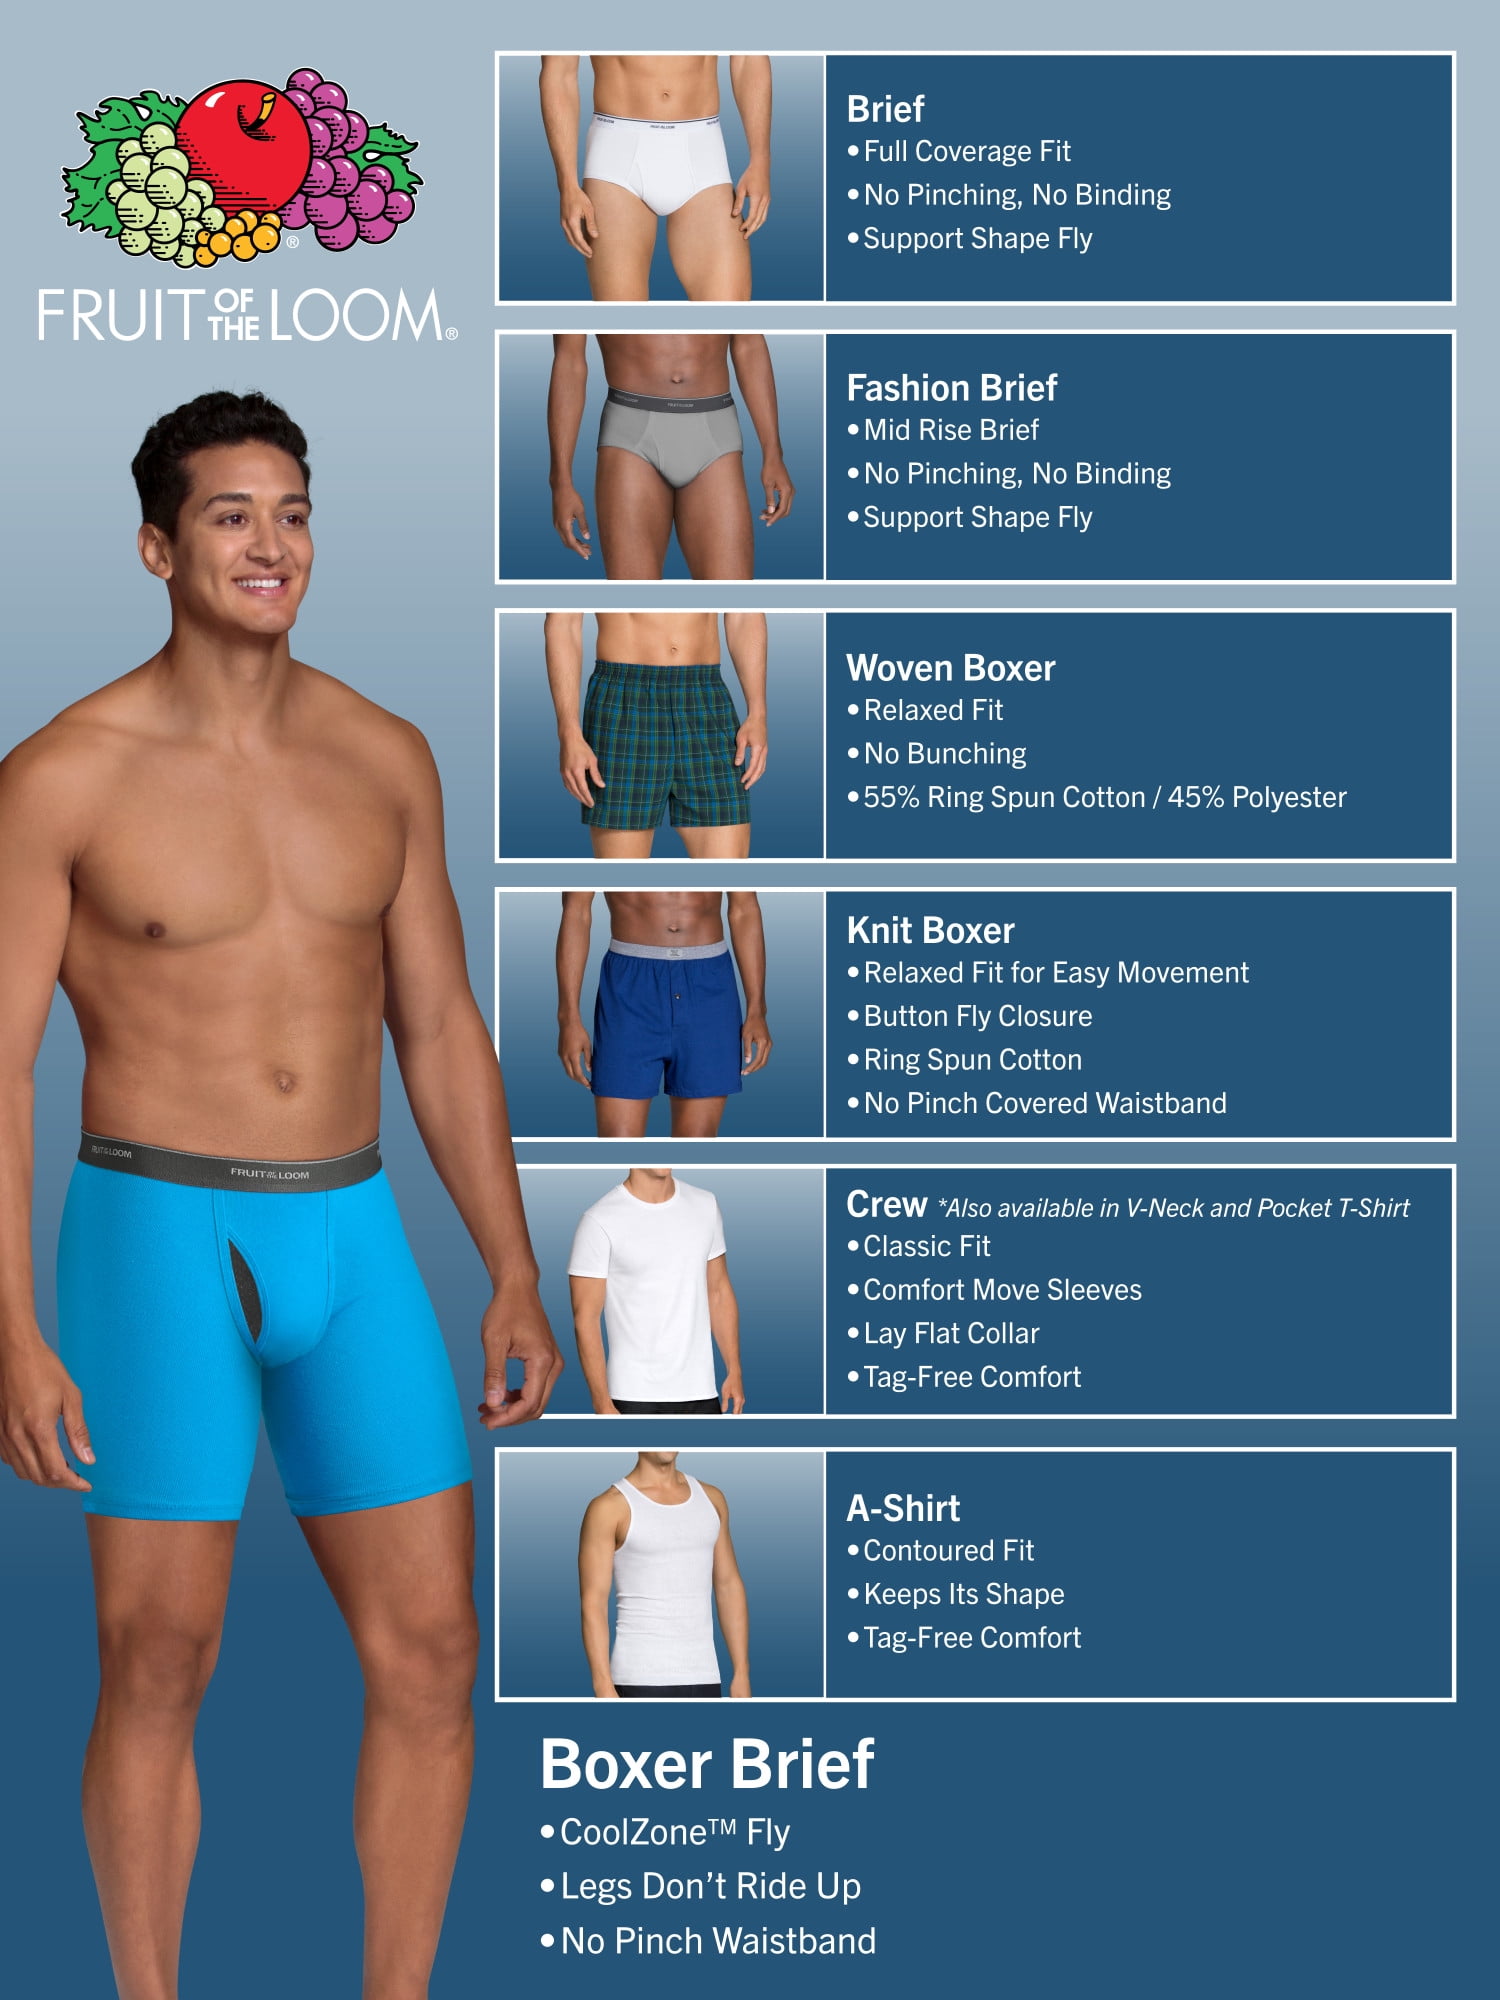 48 Wholesale Fruit Of The Loom Men's Briefs 3-Pack - at